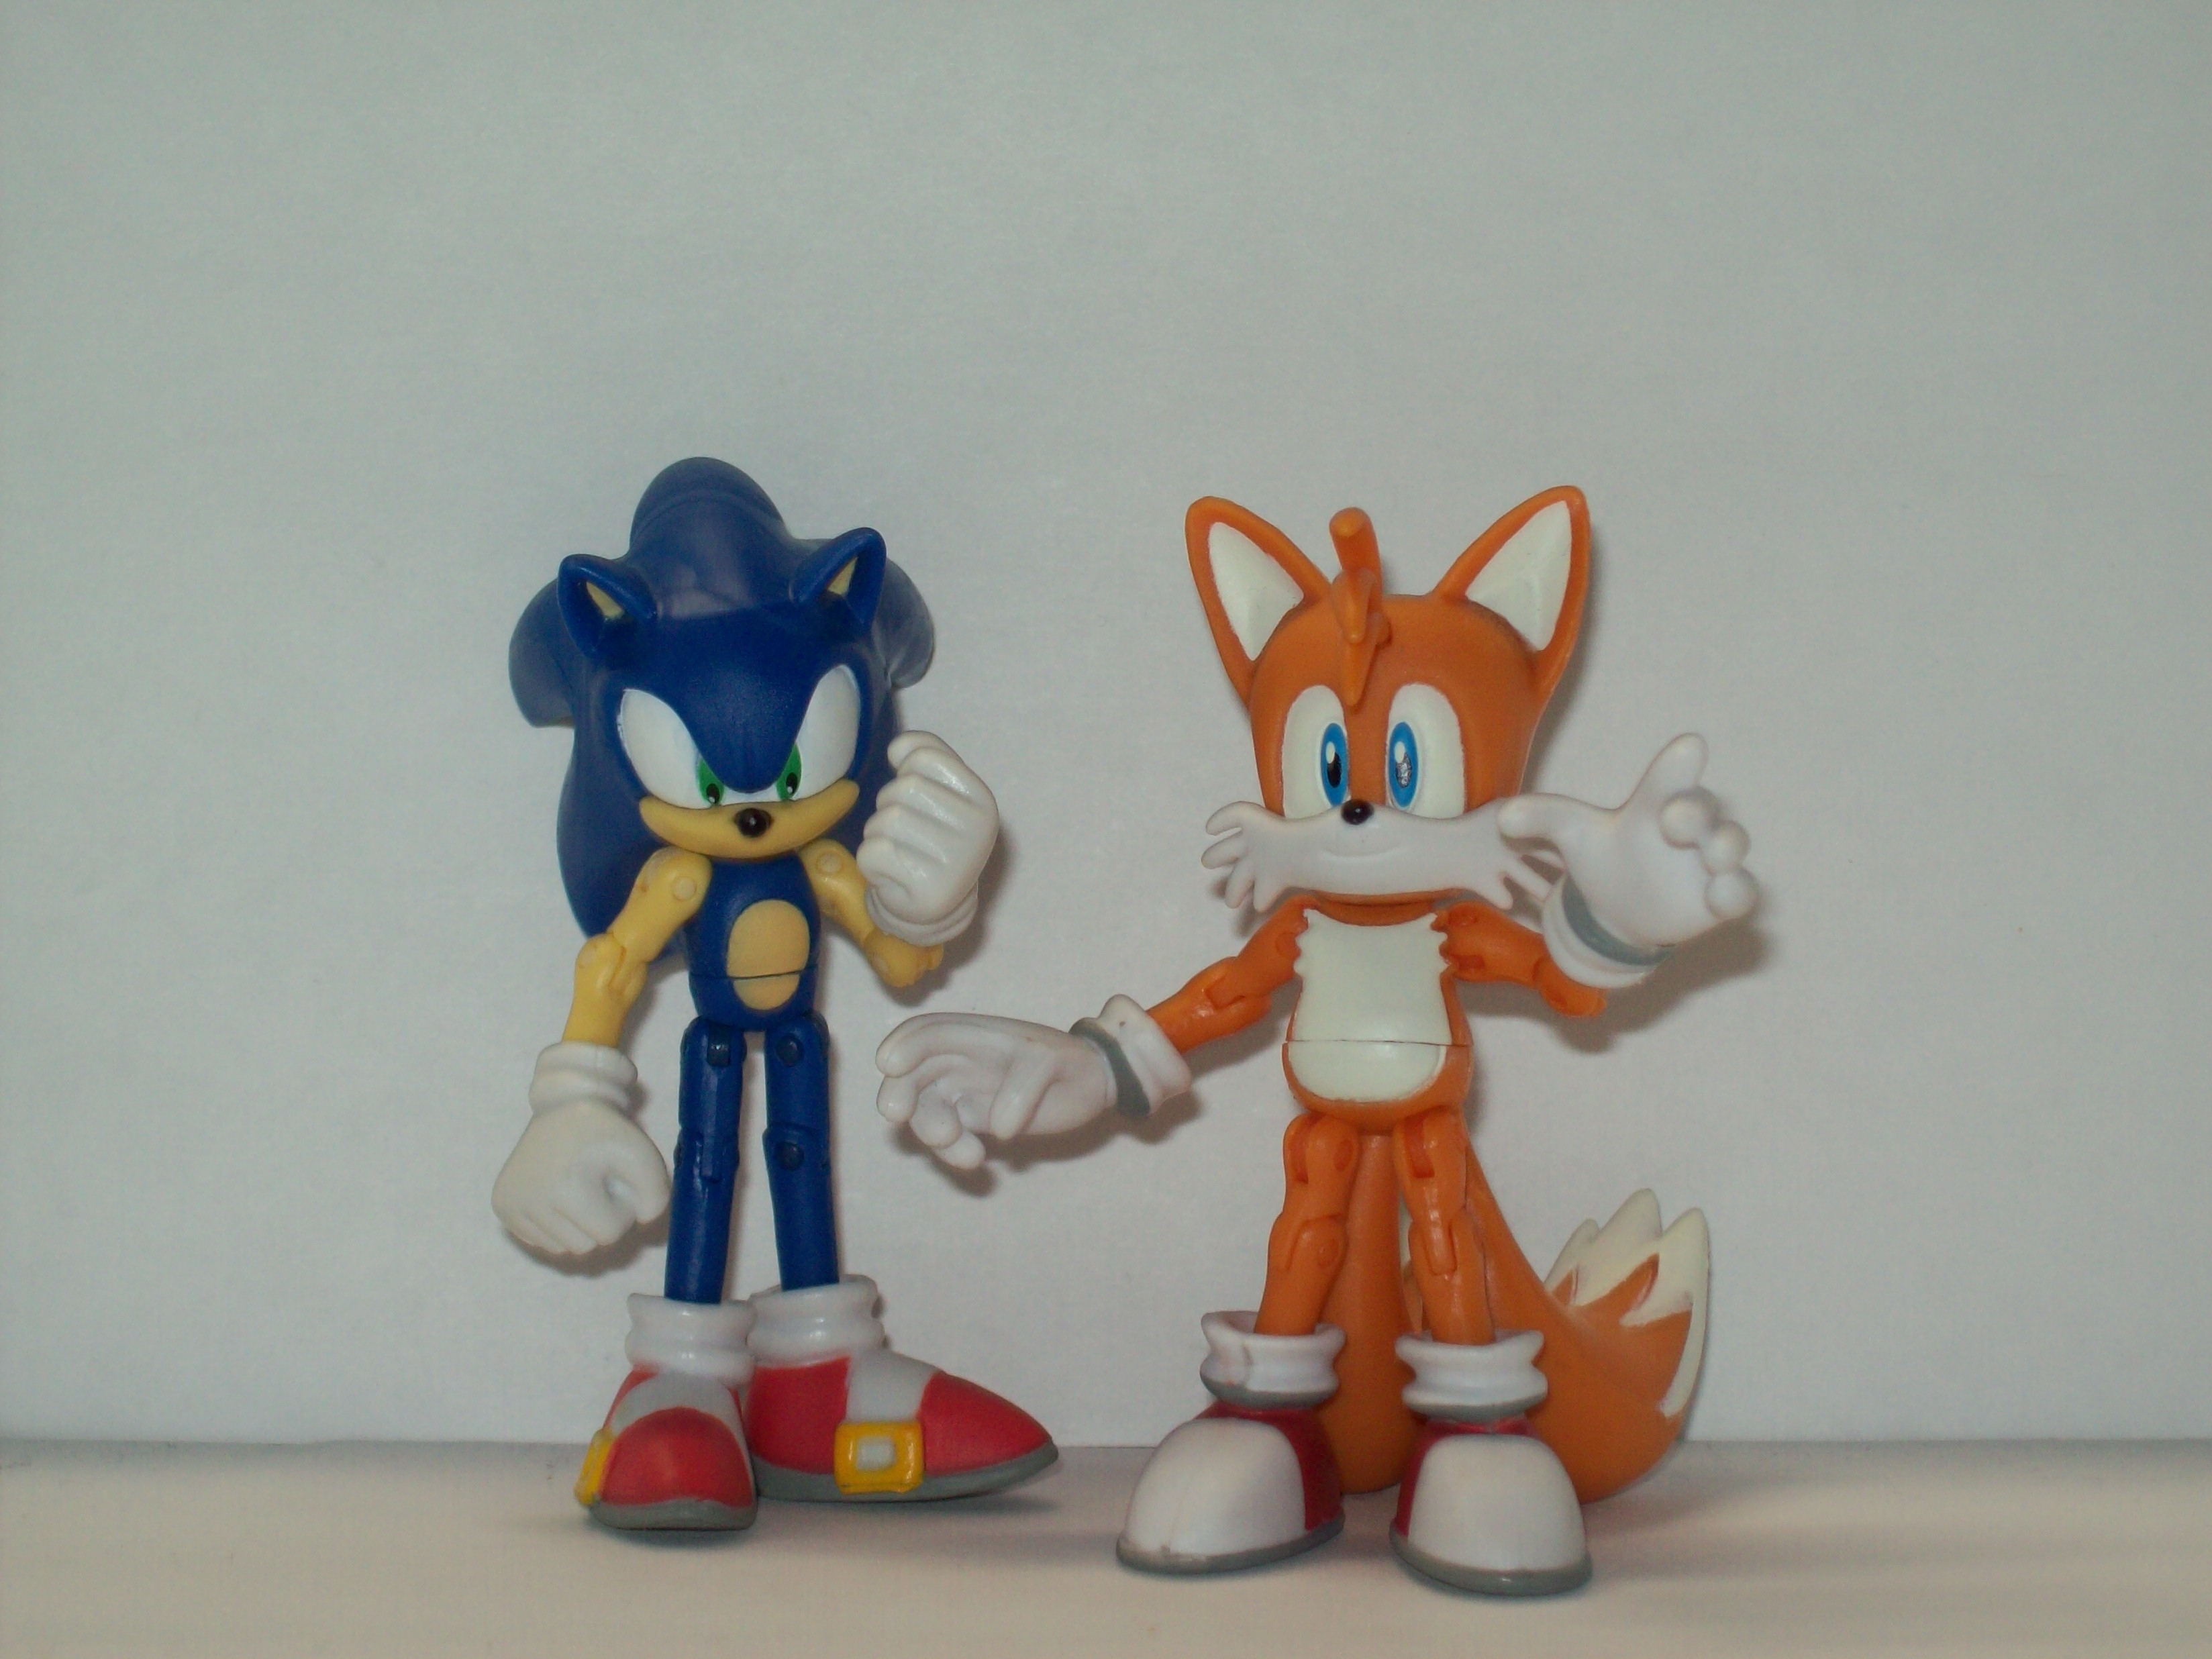 Sonic the Hedgehog Jazwares 3 inch figure Sonic,Tails and Knuckles Review By Jazwares ...3296 x 2472